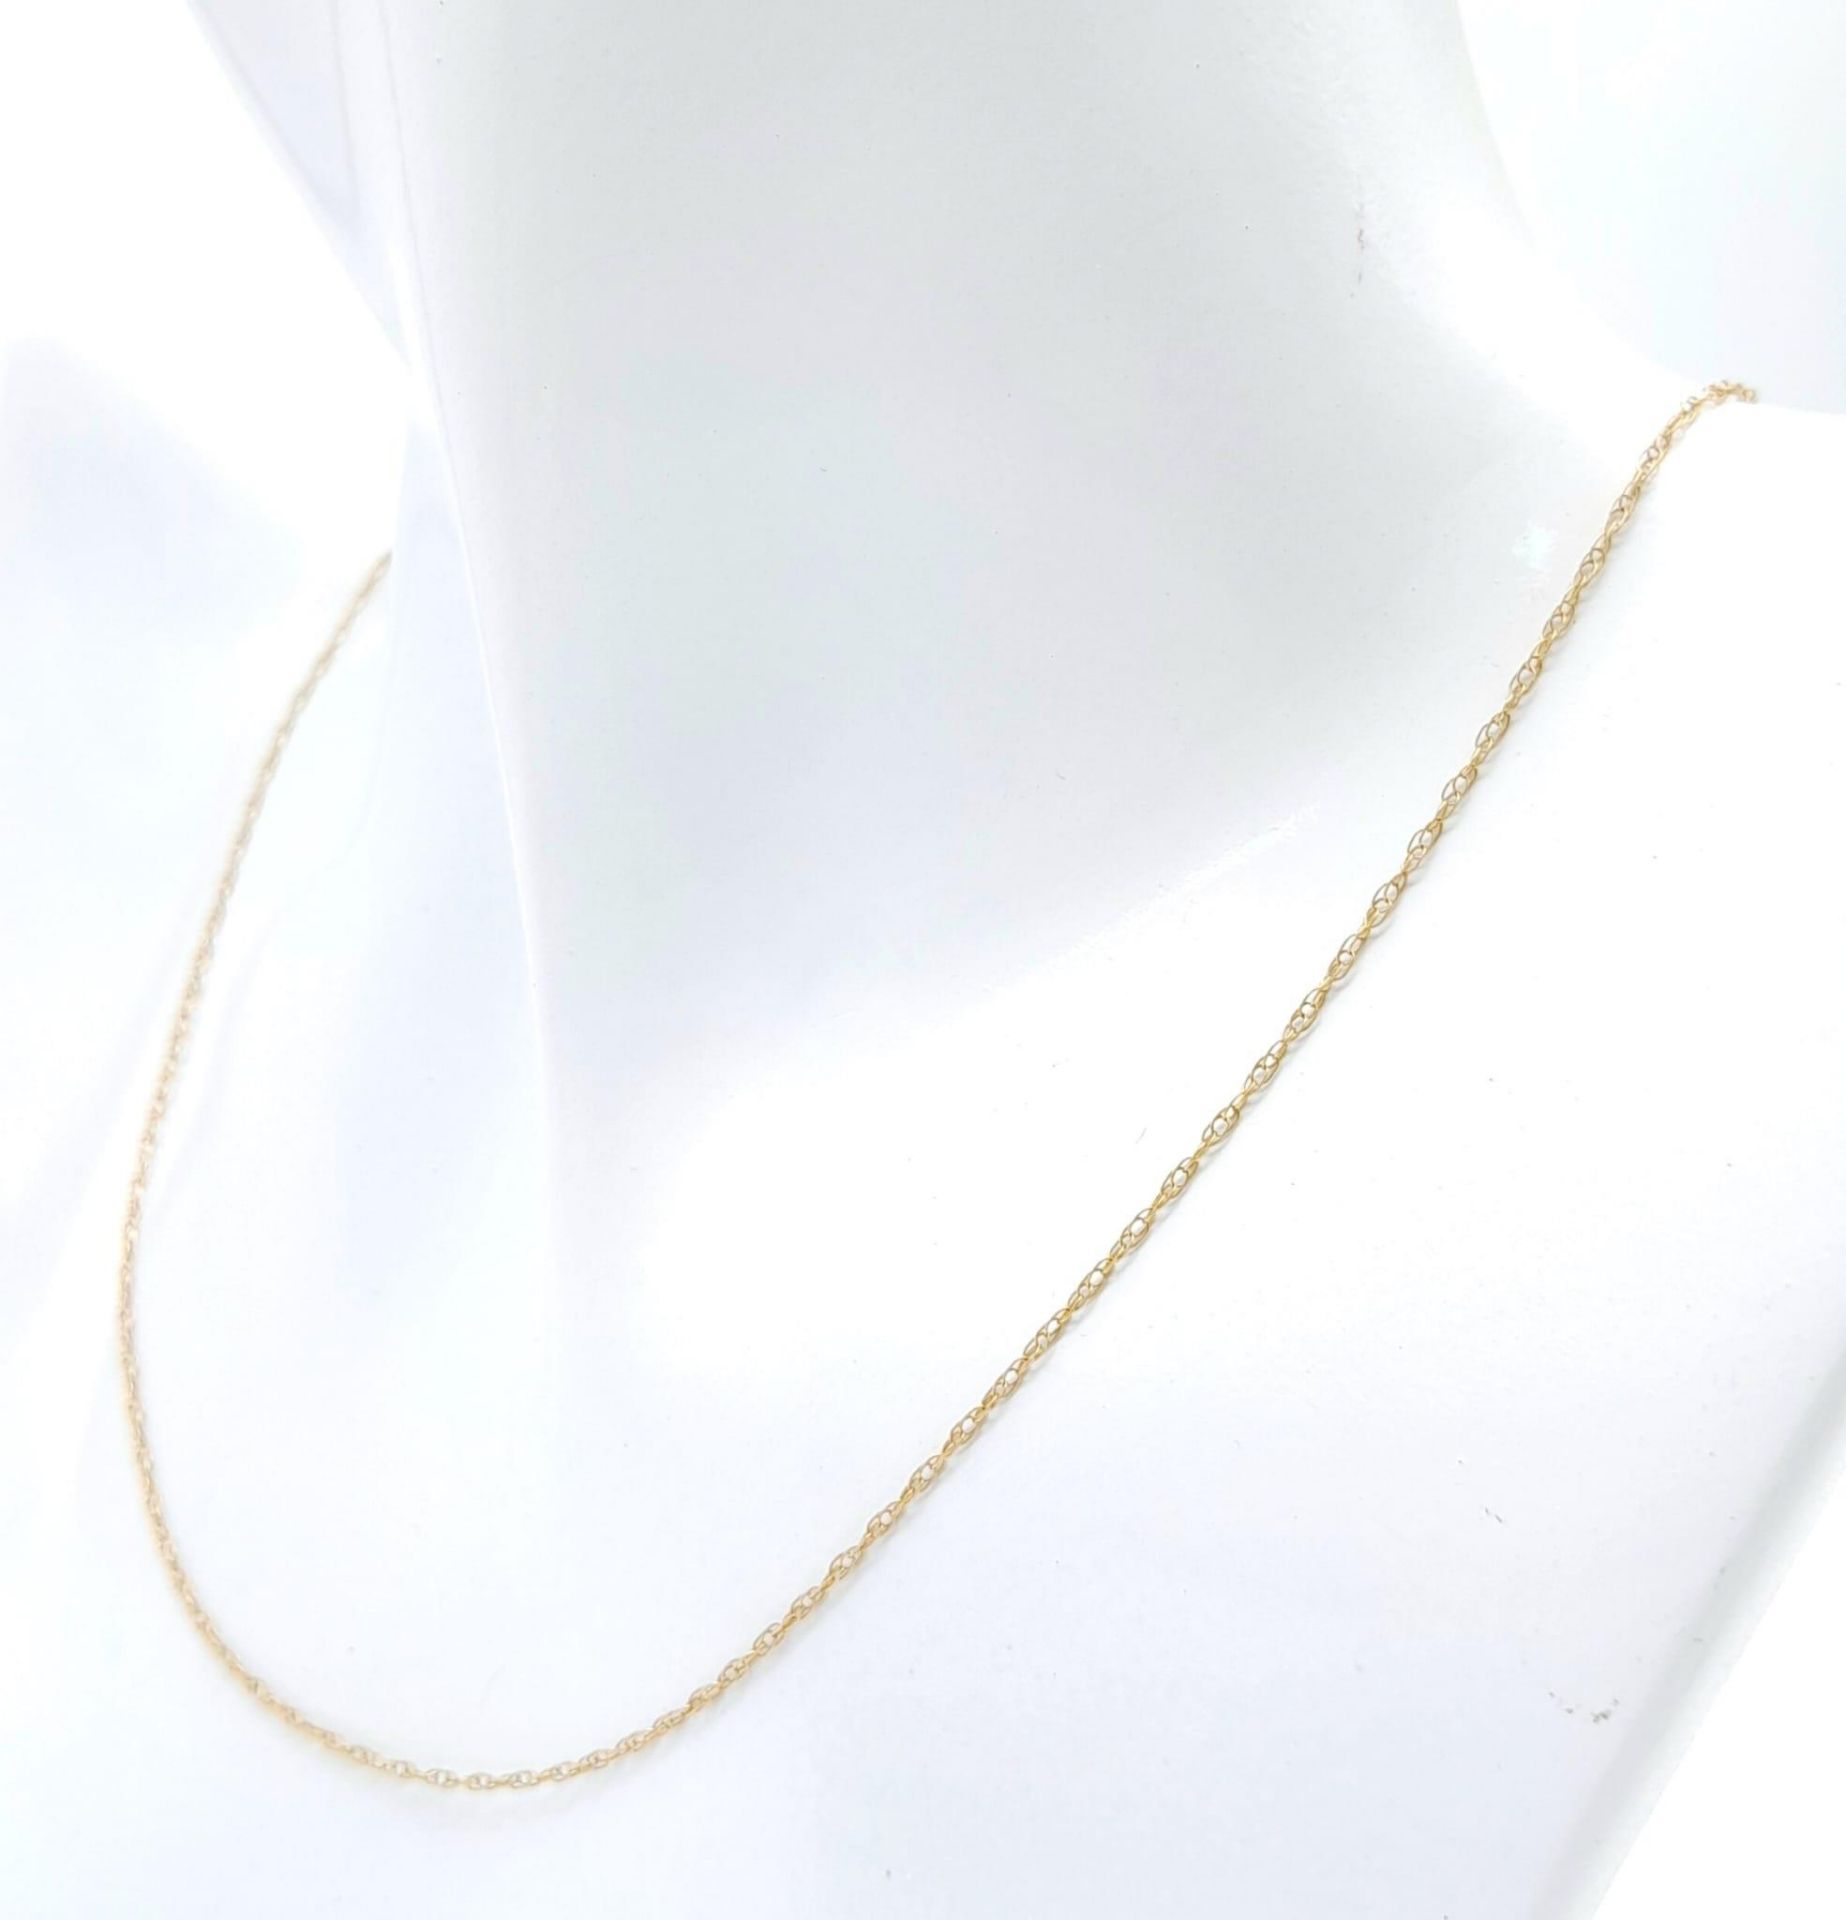 A 9K Yellow Gold Disappearing Necklace. 48cm length. 0.75g weight. - Image 3 of 5